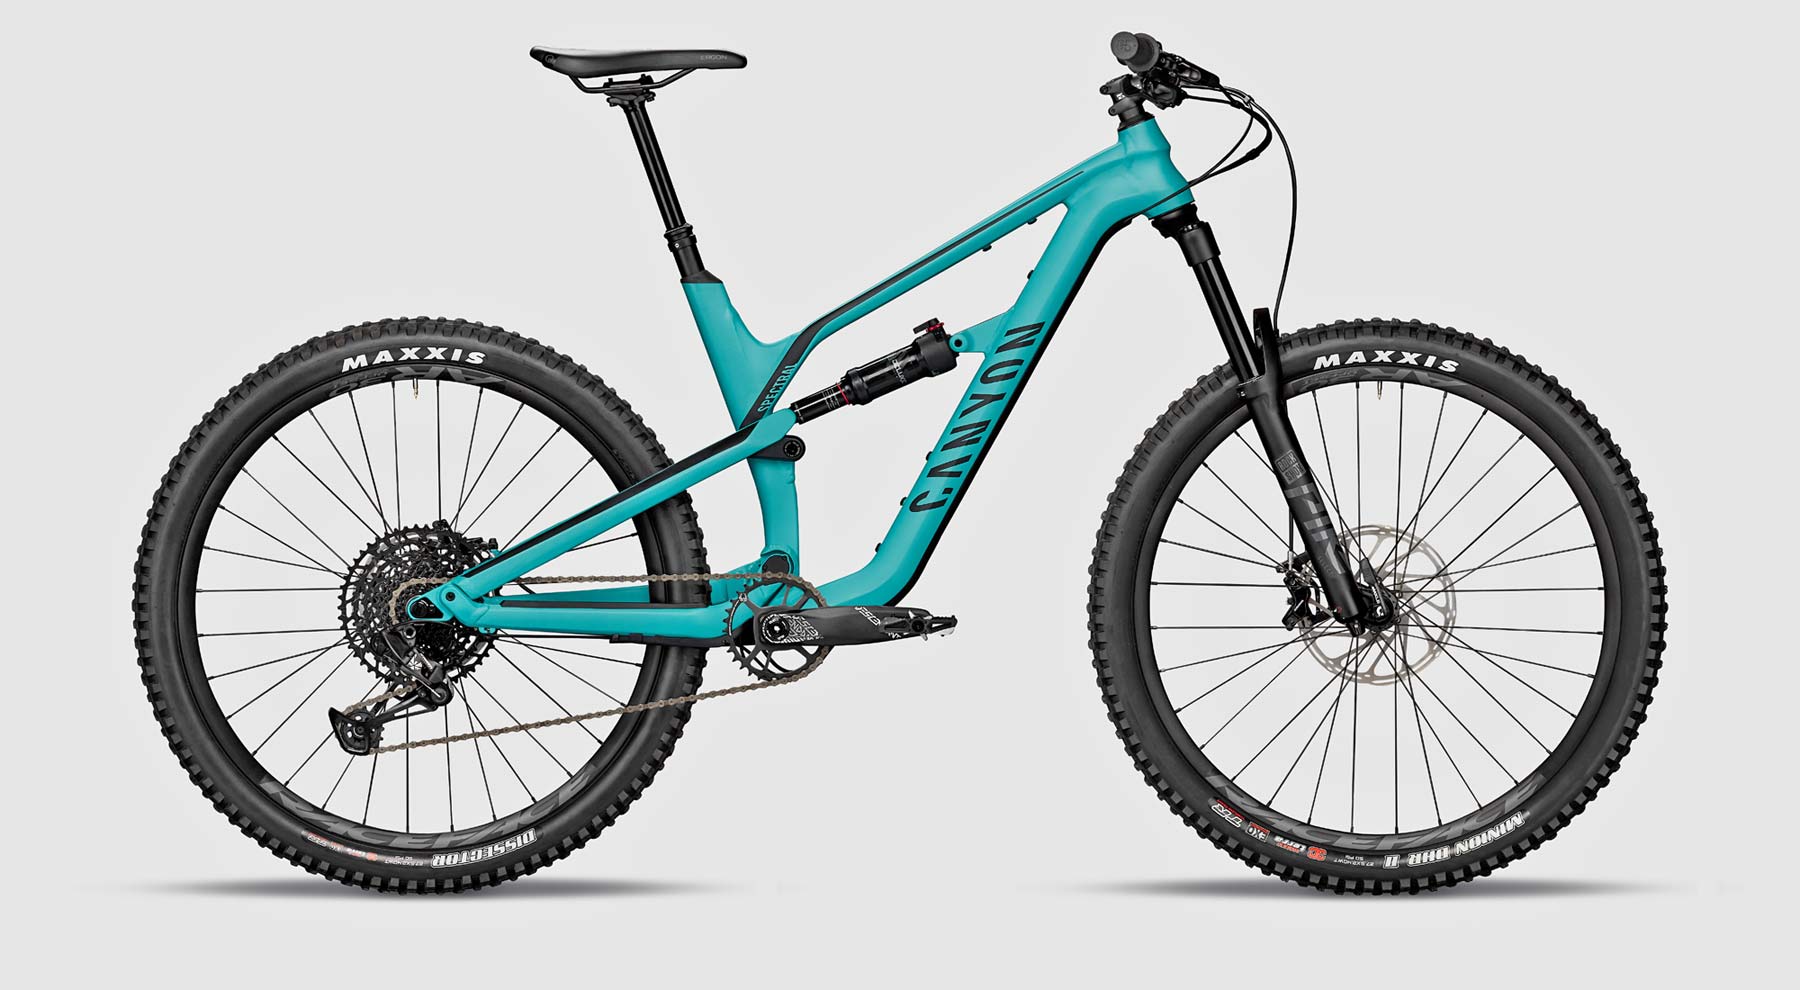 2021 Canyon Spectral trail bike, 27.5" 150mm all-mountain bike in carbon or alloy, 5